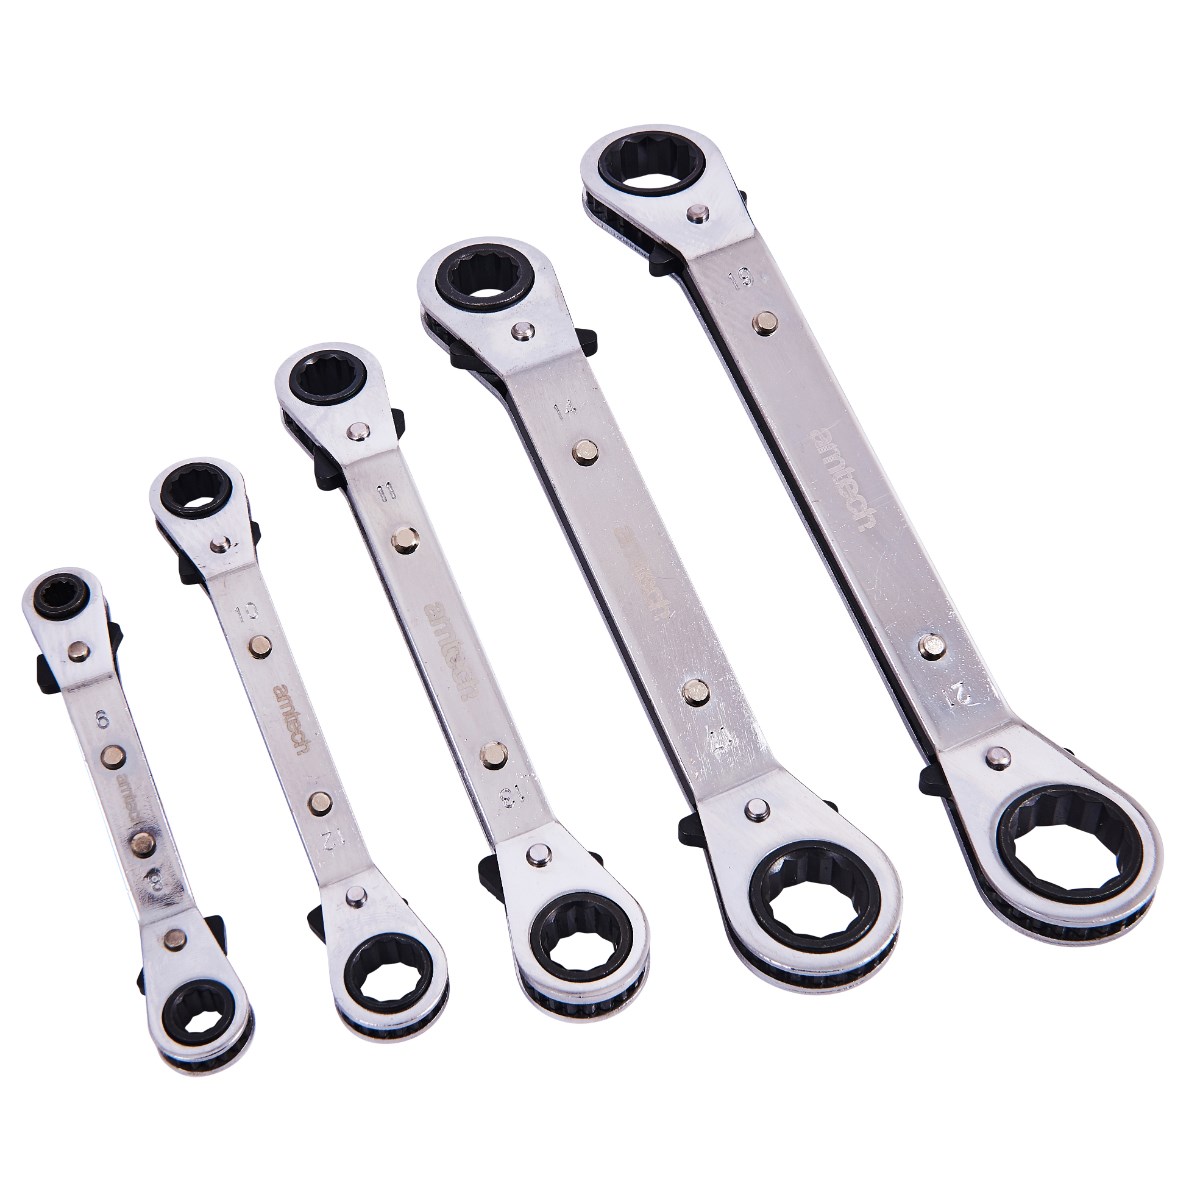 FLEXIBLE HEAD 6mm-12mm RATCHET SPANNER OPEN/RING Combination Wrench NEW  H1O2 - Walmart.com